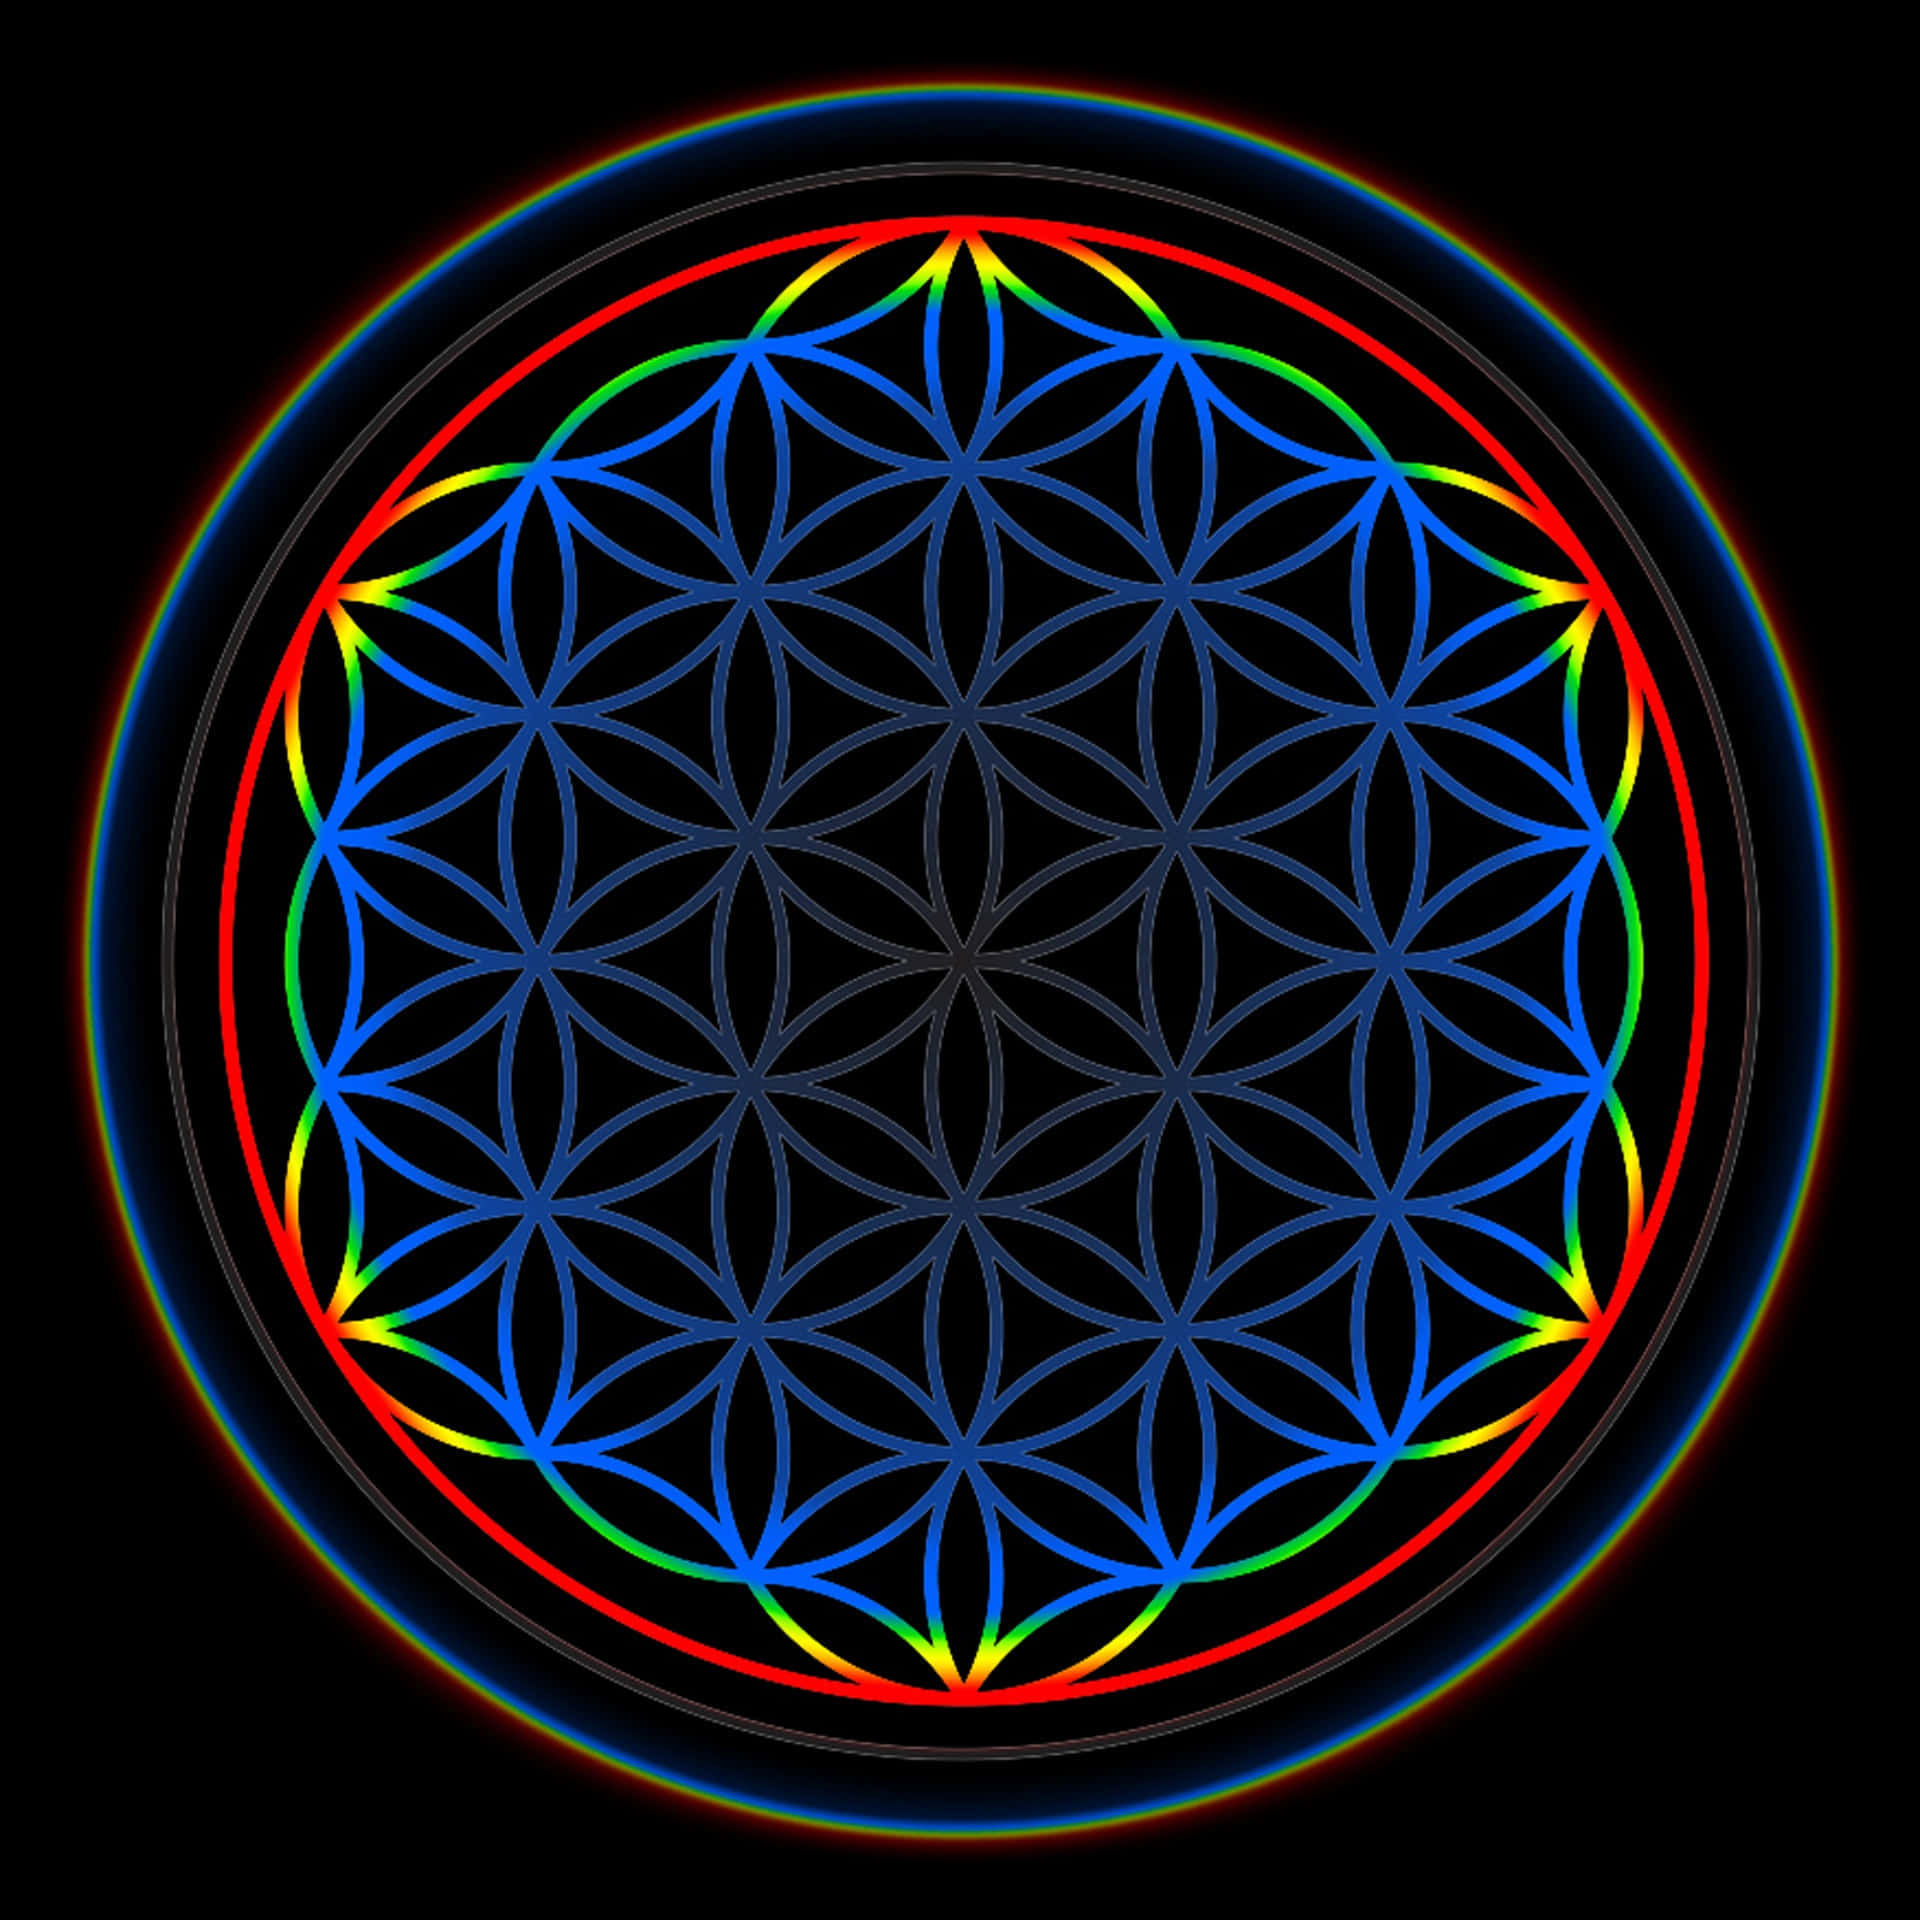 A Flower Of Life In A Circle With Colorful Lights Wallpaper